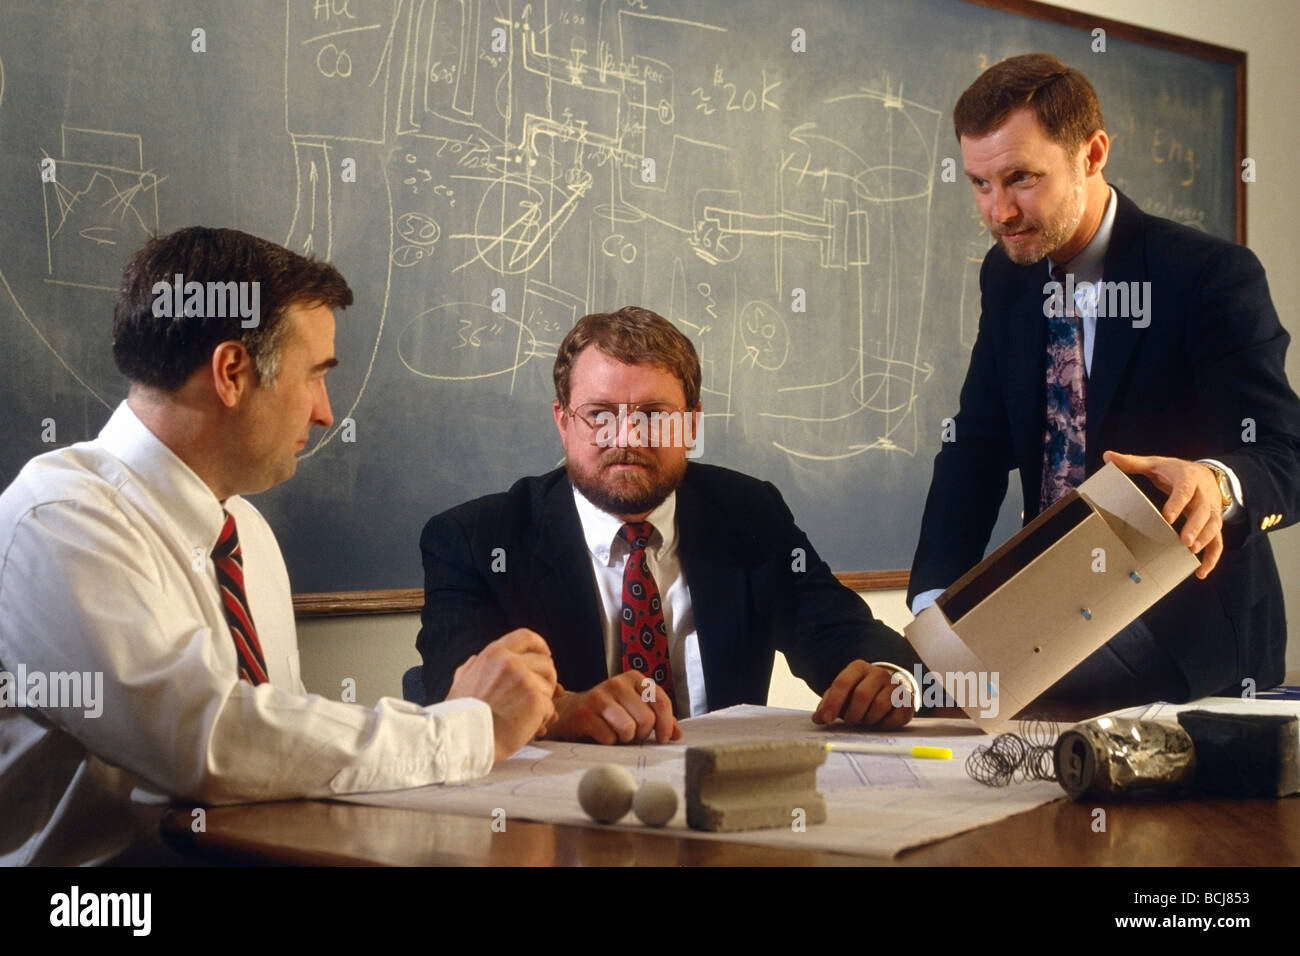 Businessmen Meeting in Engineering Office at Desk Stock Photo